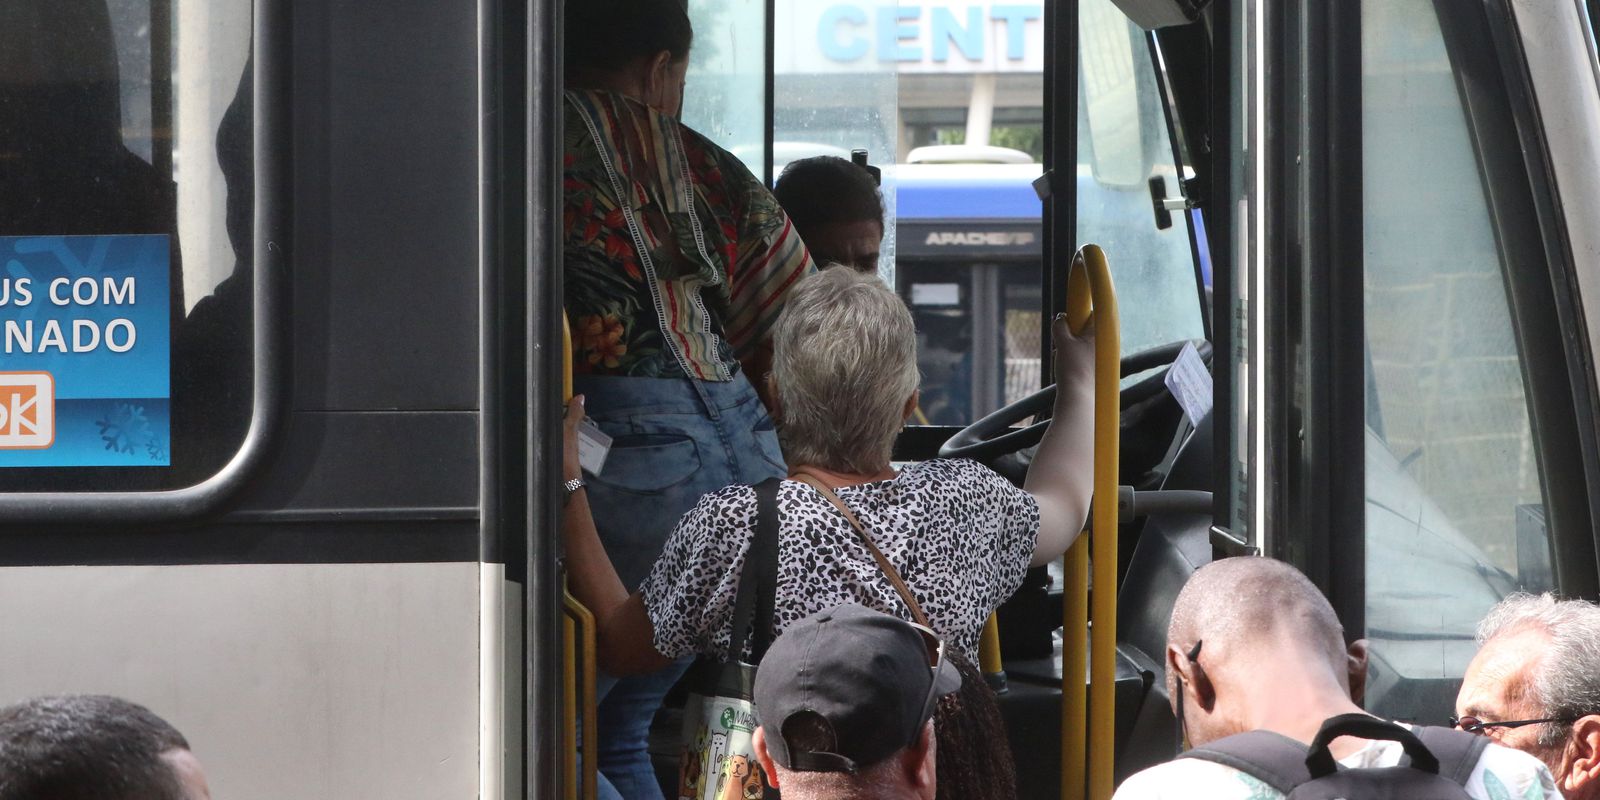 Urban buses lost 10.8 million passengers in 2021